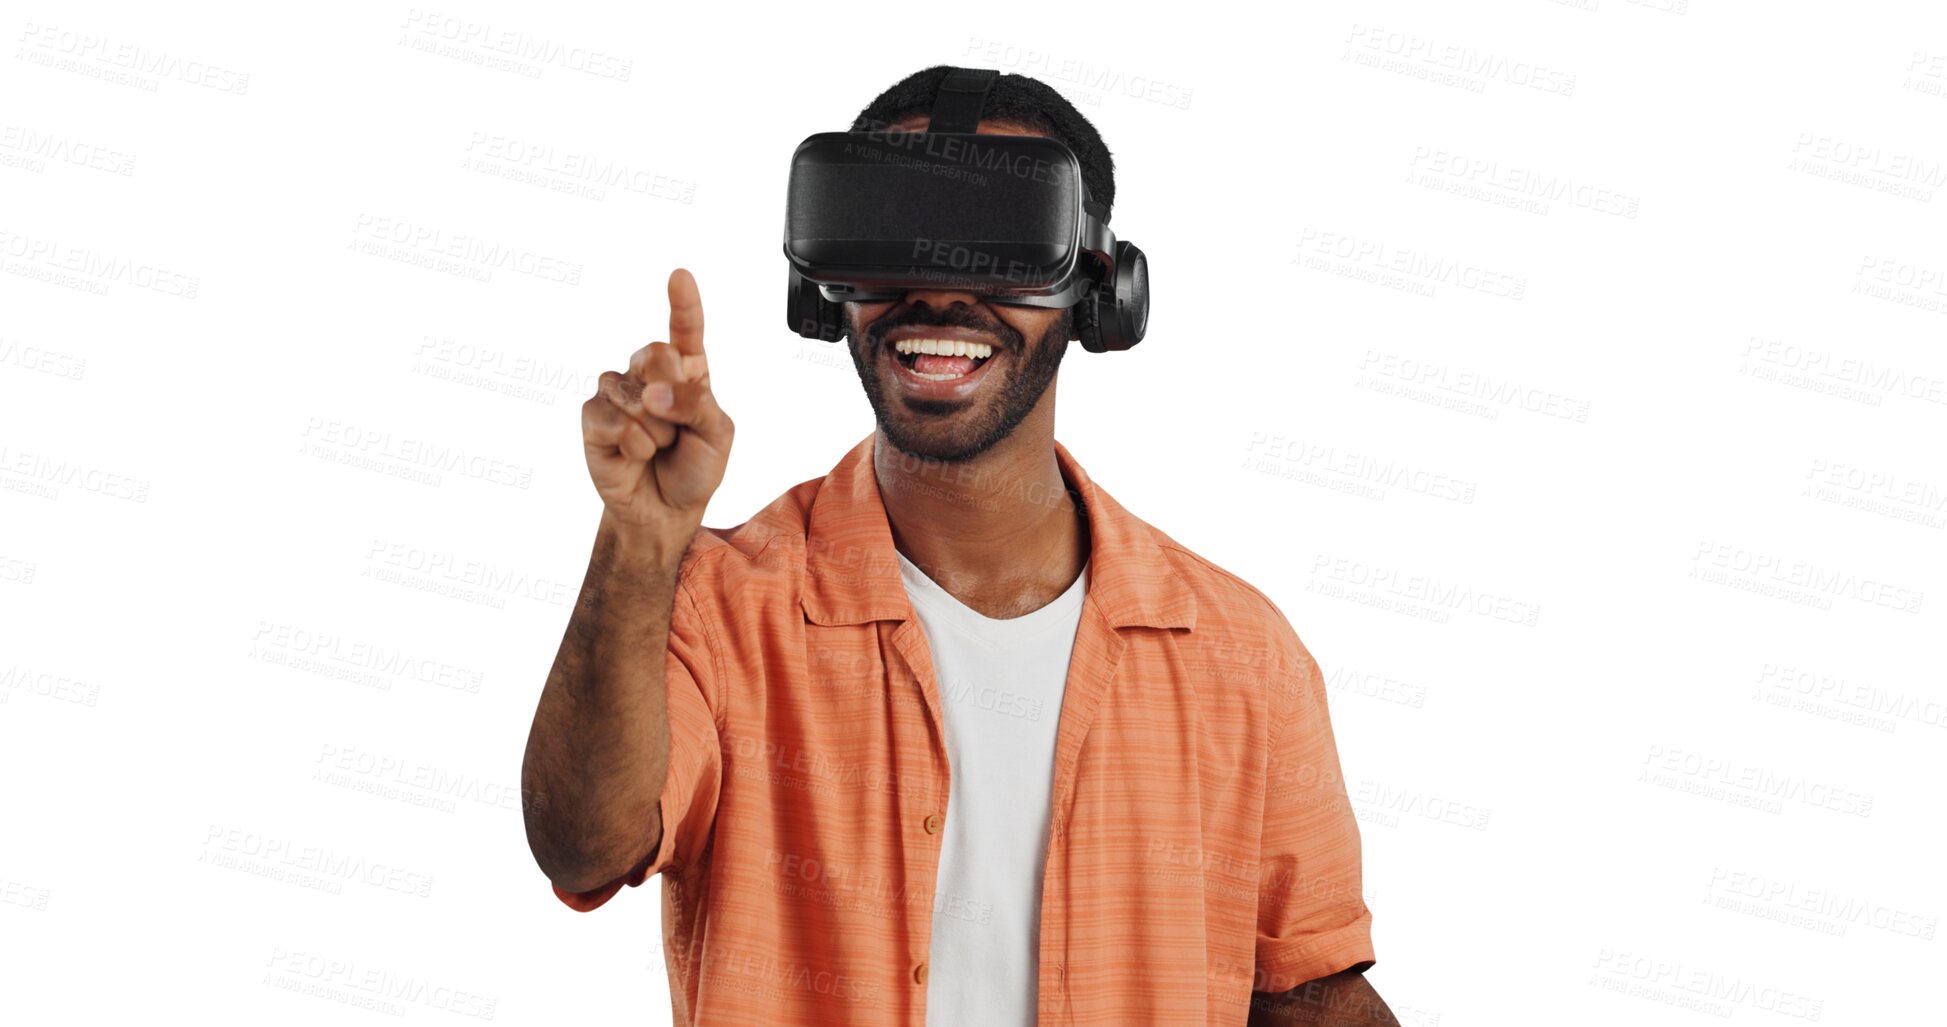 Buy stock photo Isolated African man, virtual reality glasses and happy with finger, click or futuristic ui by transparent png background. Person, AR goggles and smile with 3D user experience in metaverse with hand